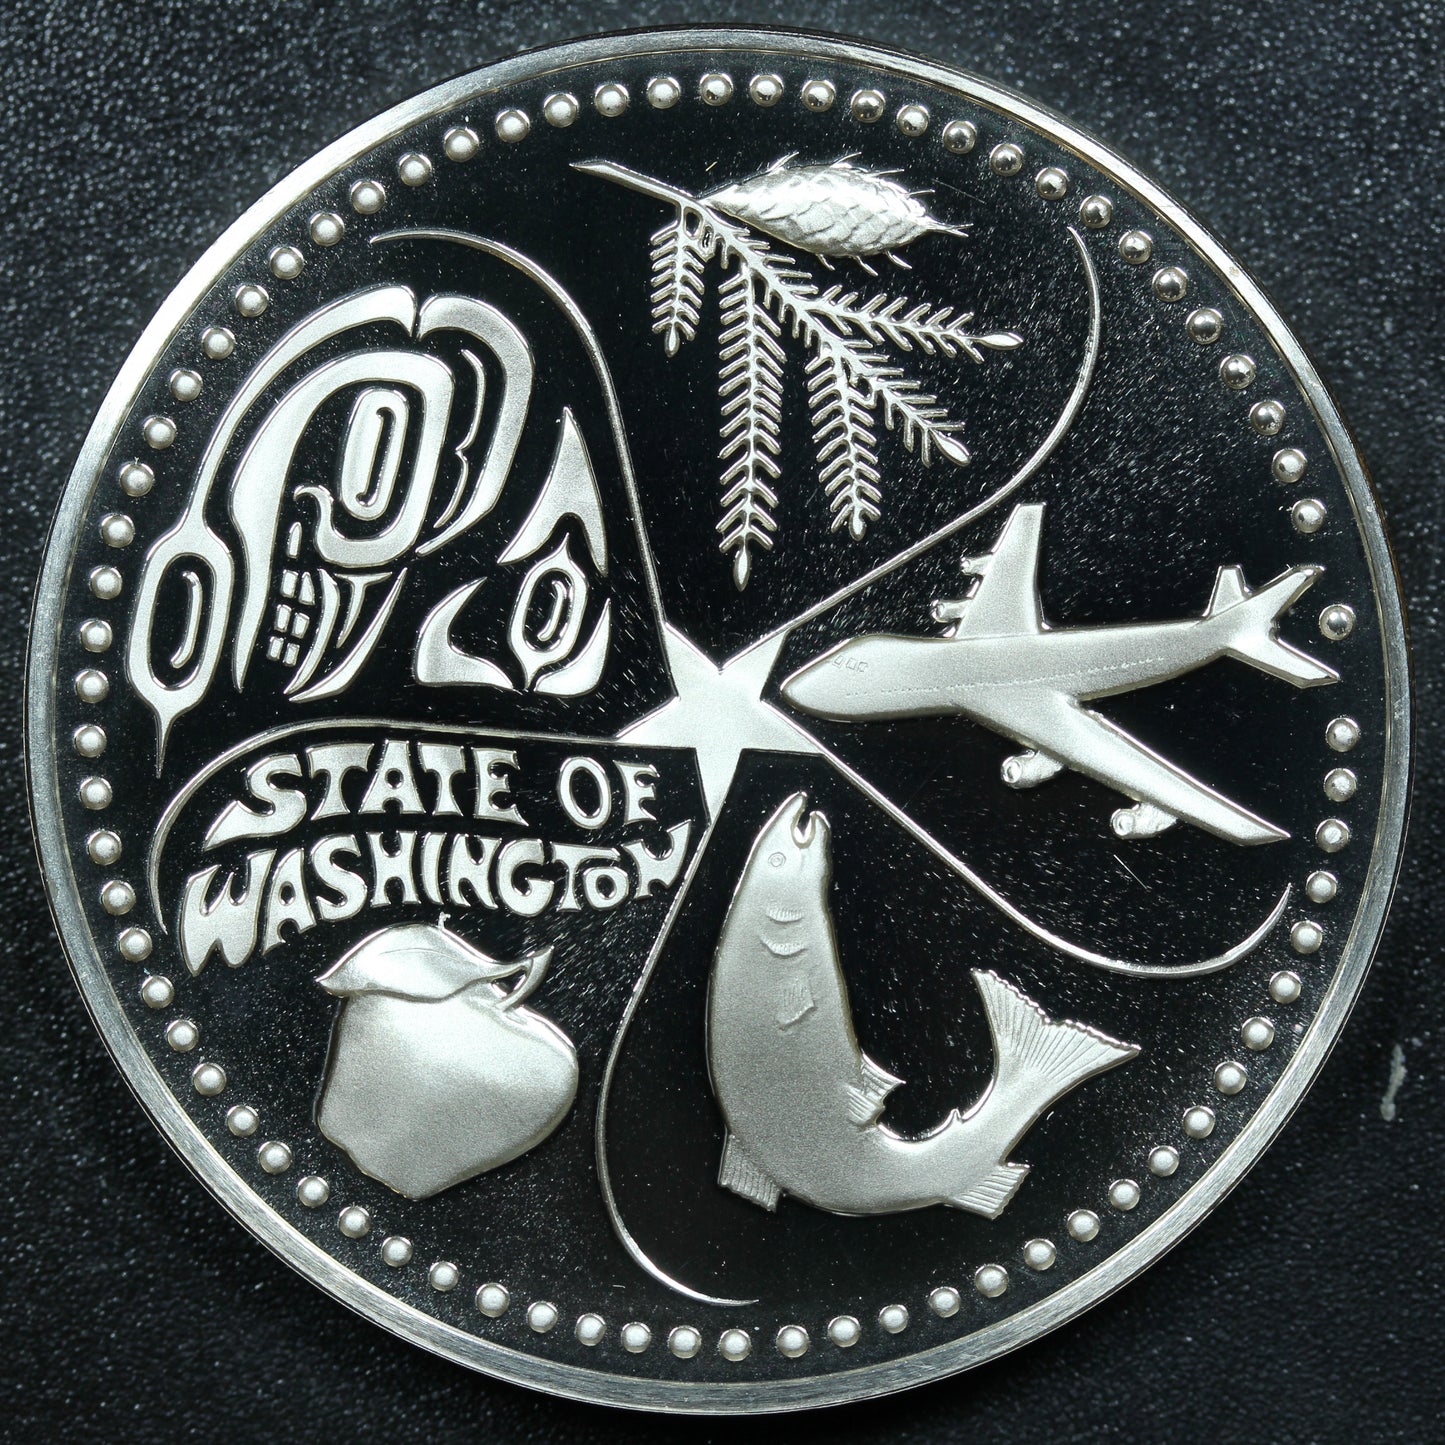 Franklin Mint 50 State Bicentennial Medal - WASHINGTON Sterling Silver Proof w/ Capsule